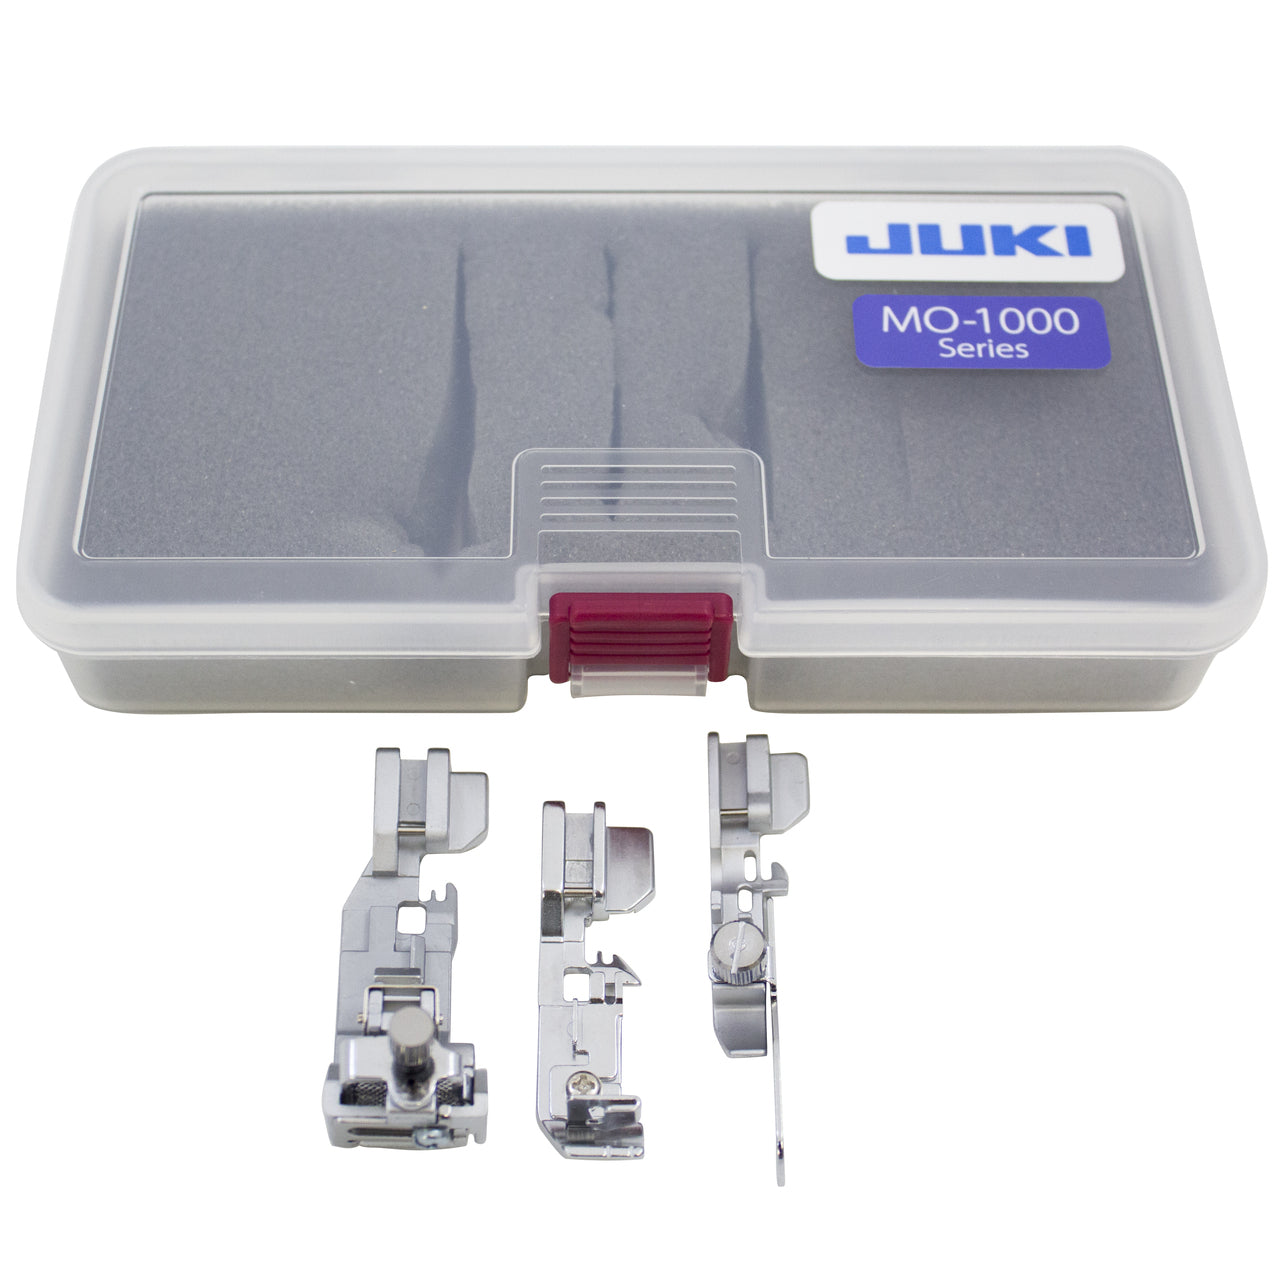 Juki 3 Pack of Serger Feet for MO-1000 and MO-2000 Sergers